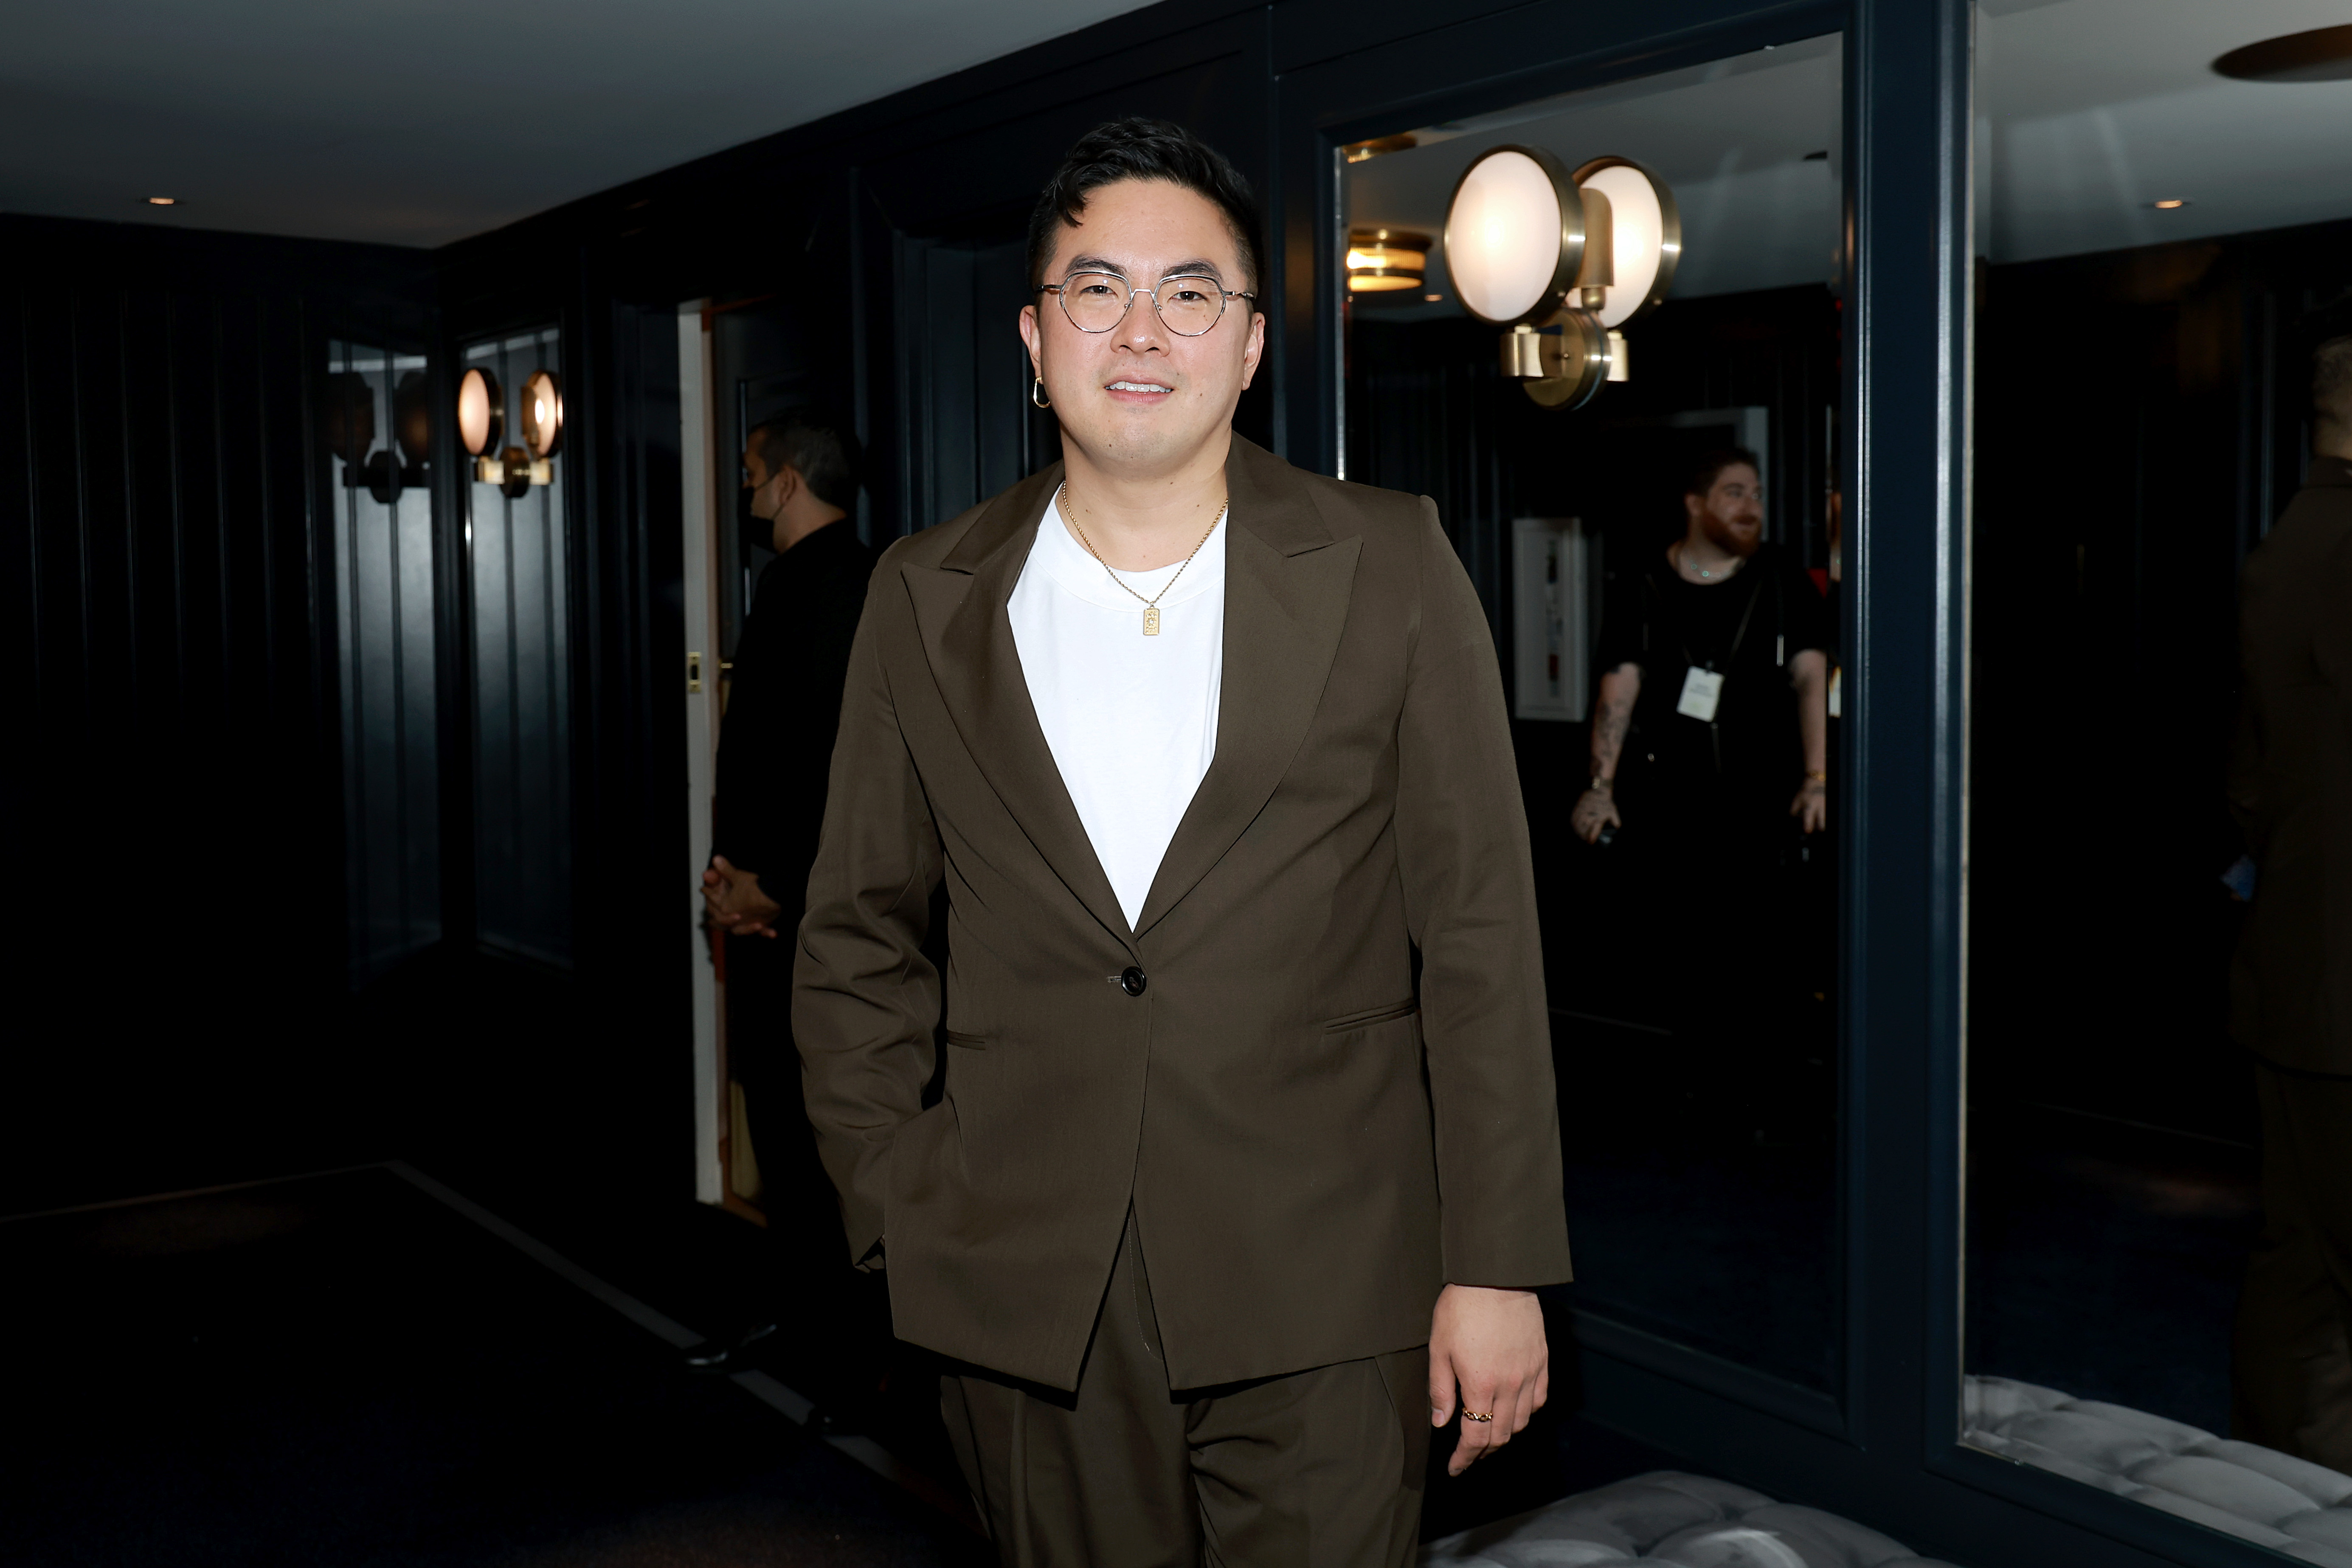 Bowen Yang at the CFDA Fashion Awards on November 7, 2022, in New York City. | Source: Getty Images